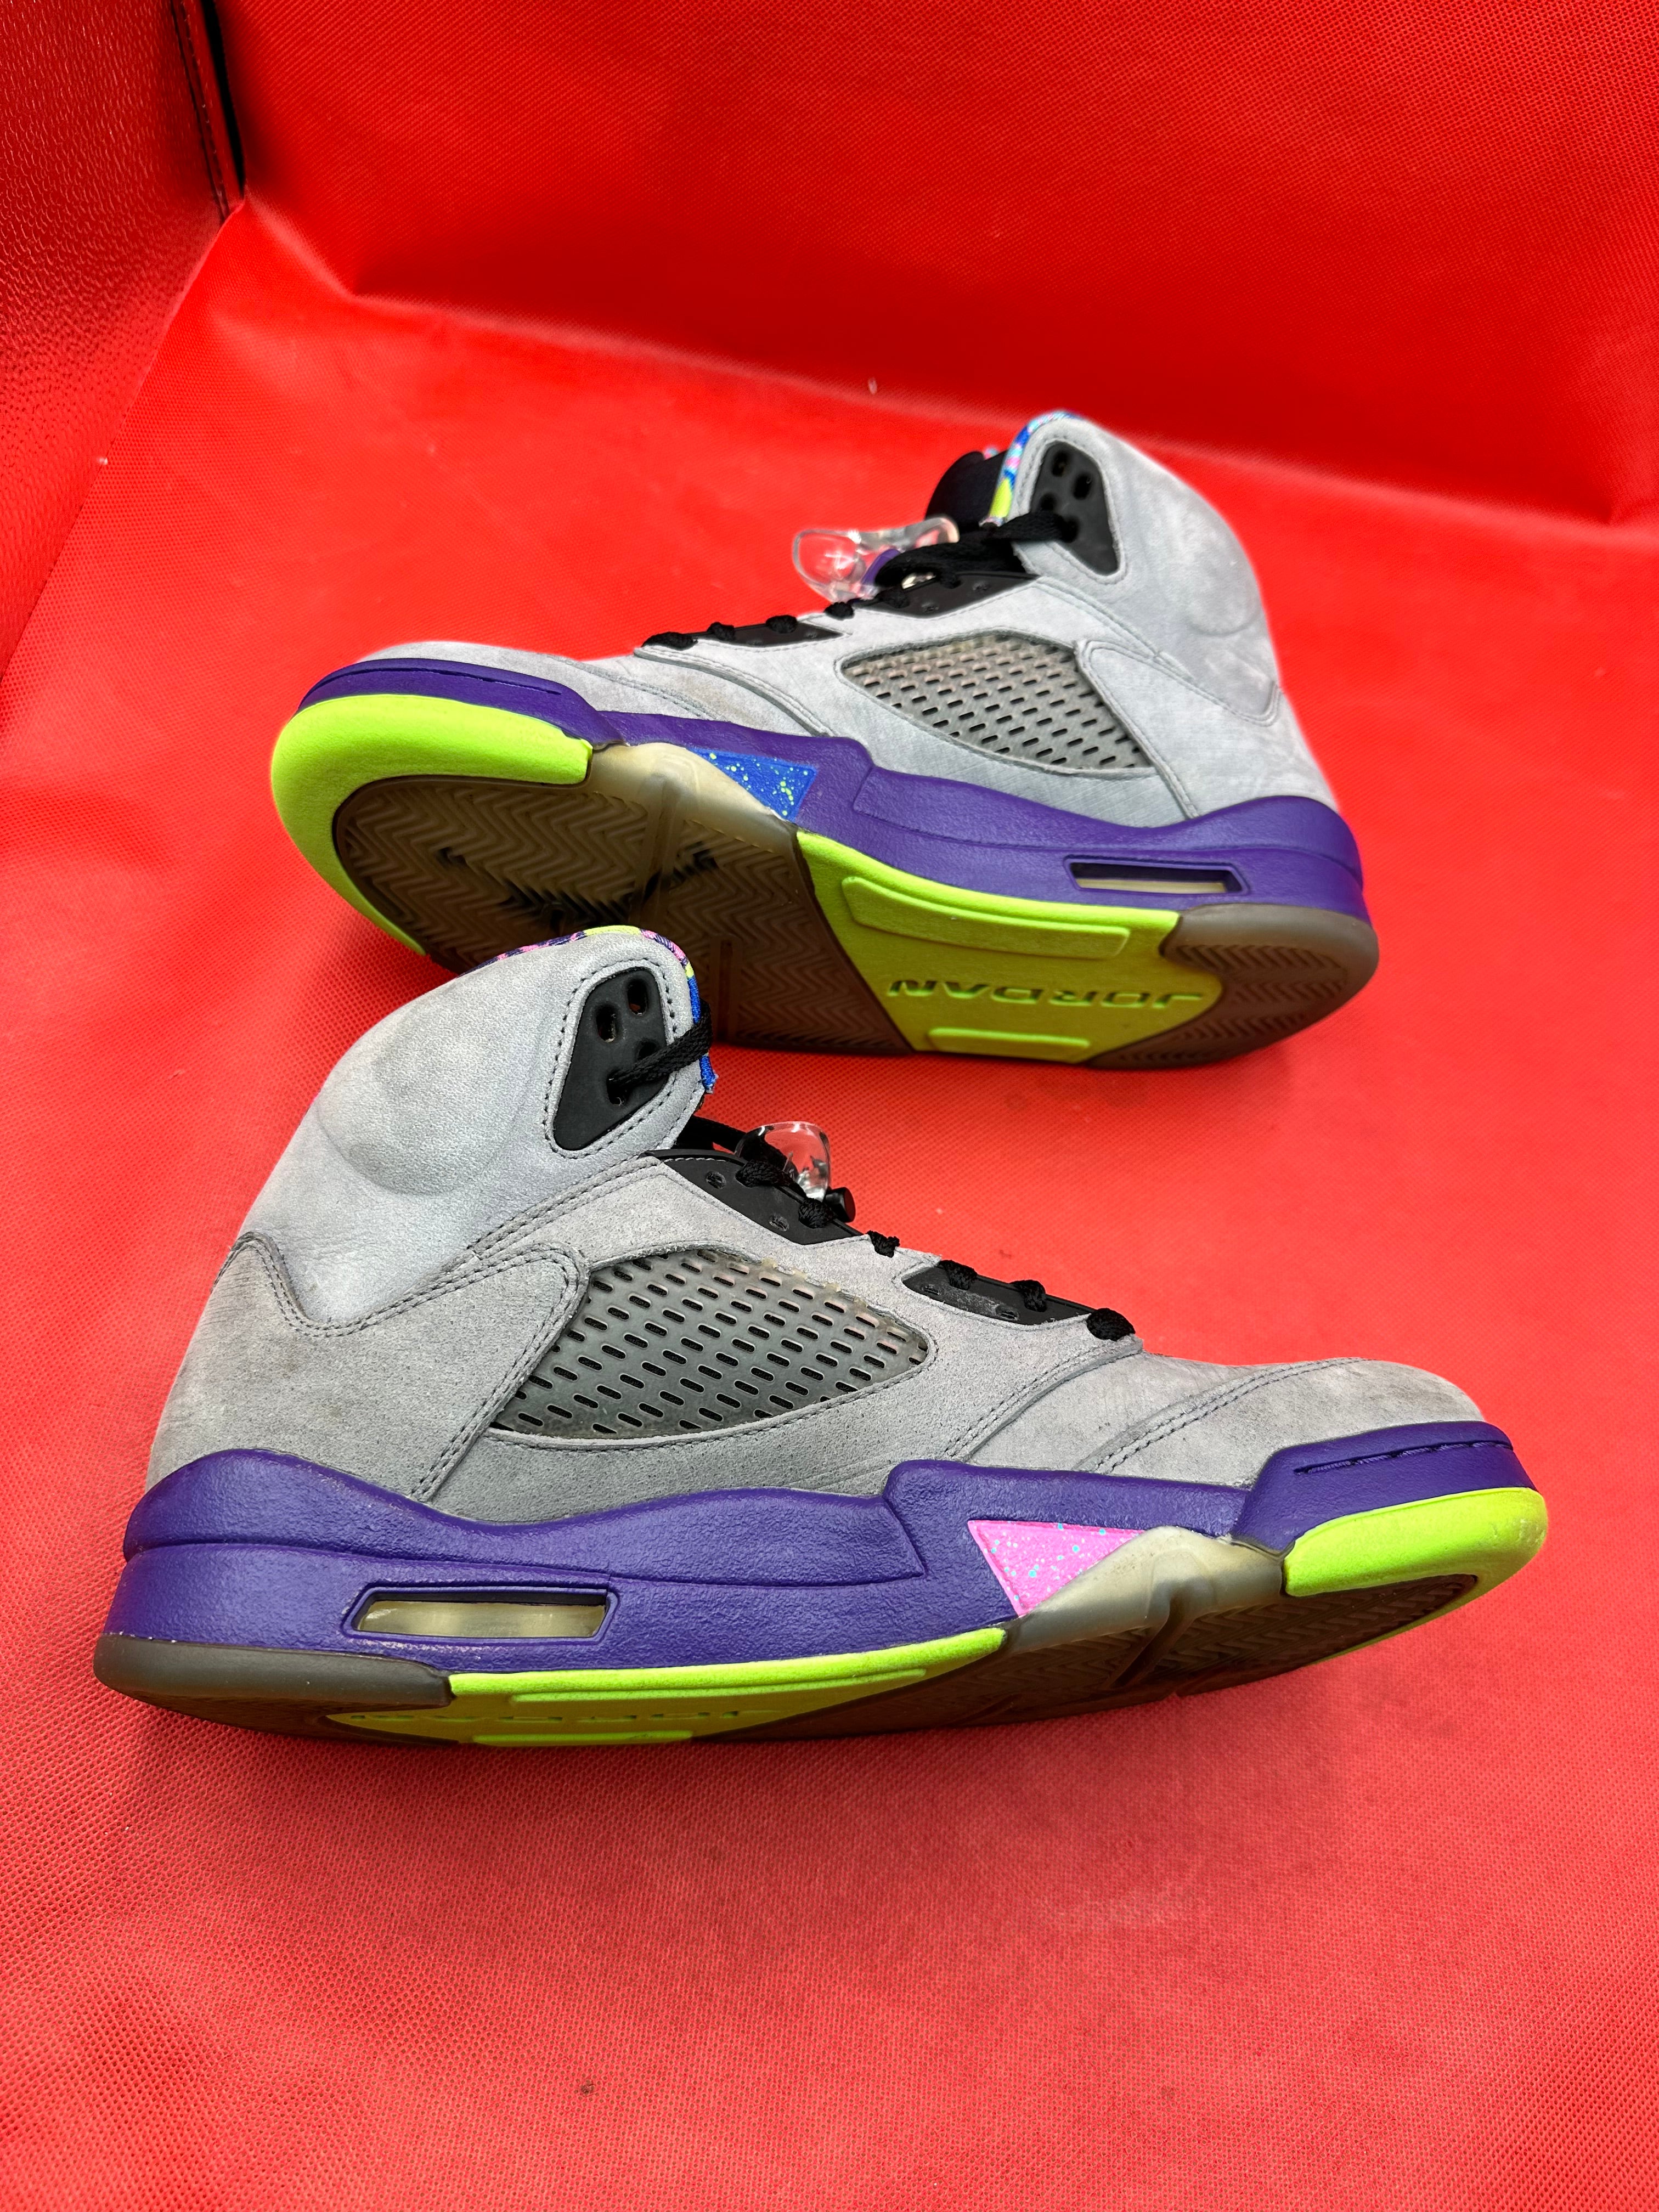 Bel Air 5s size 8.5